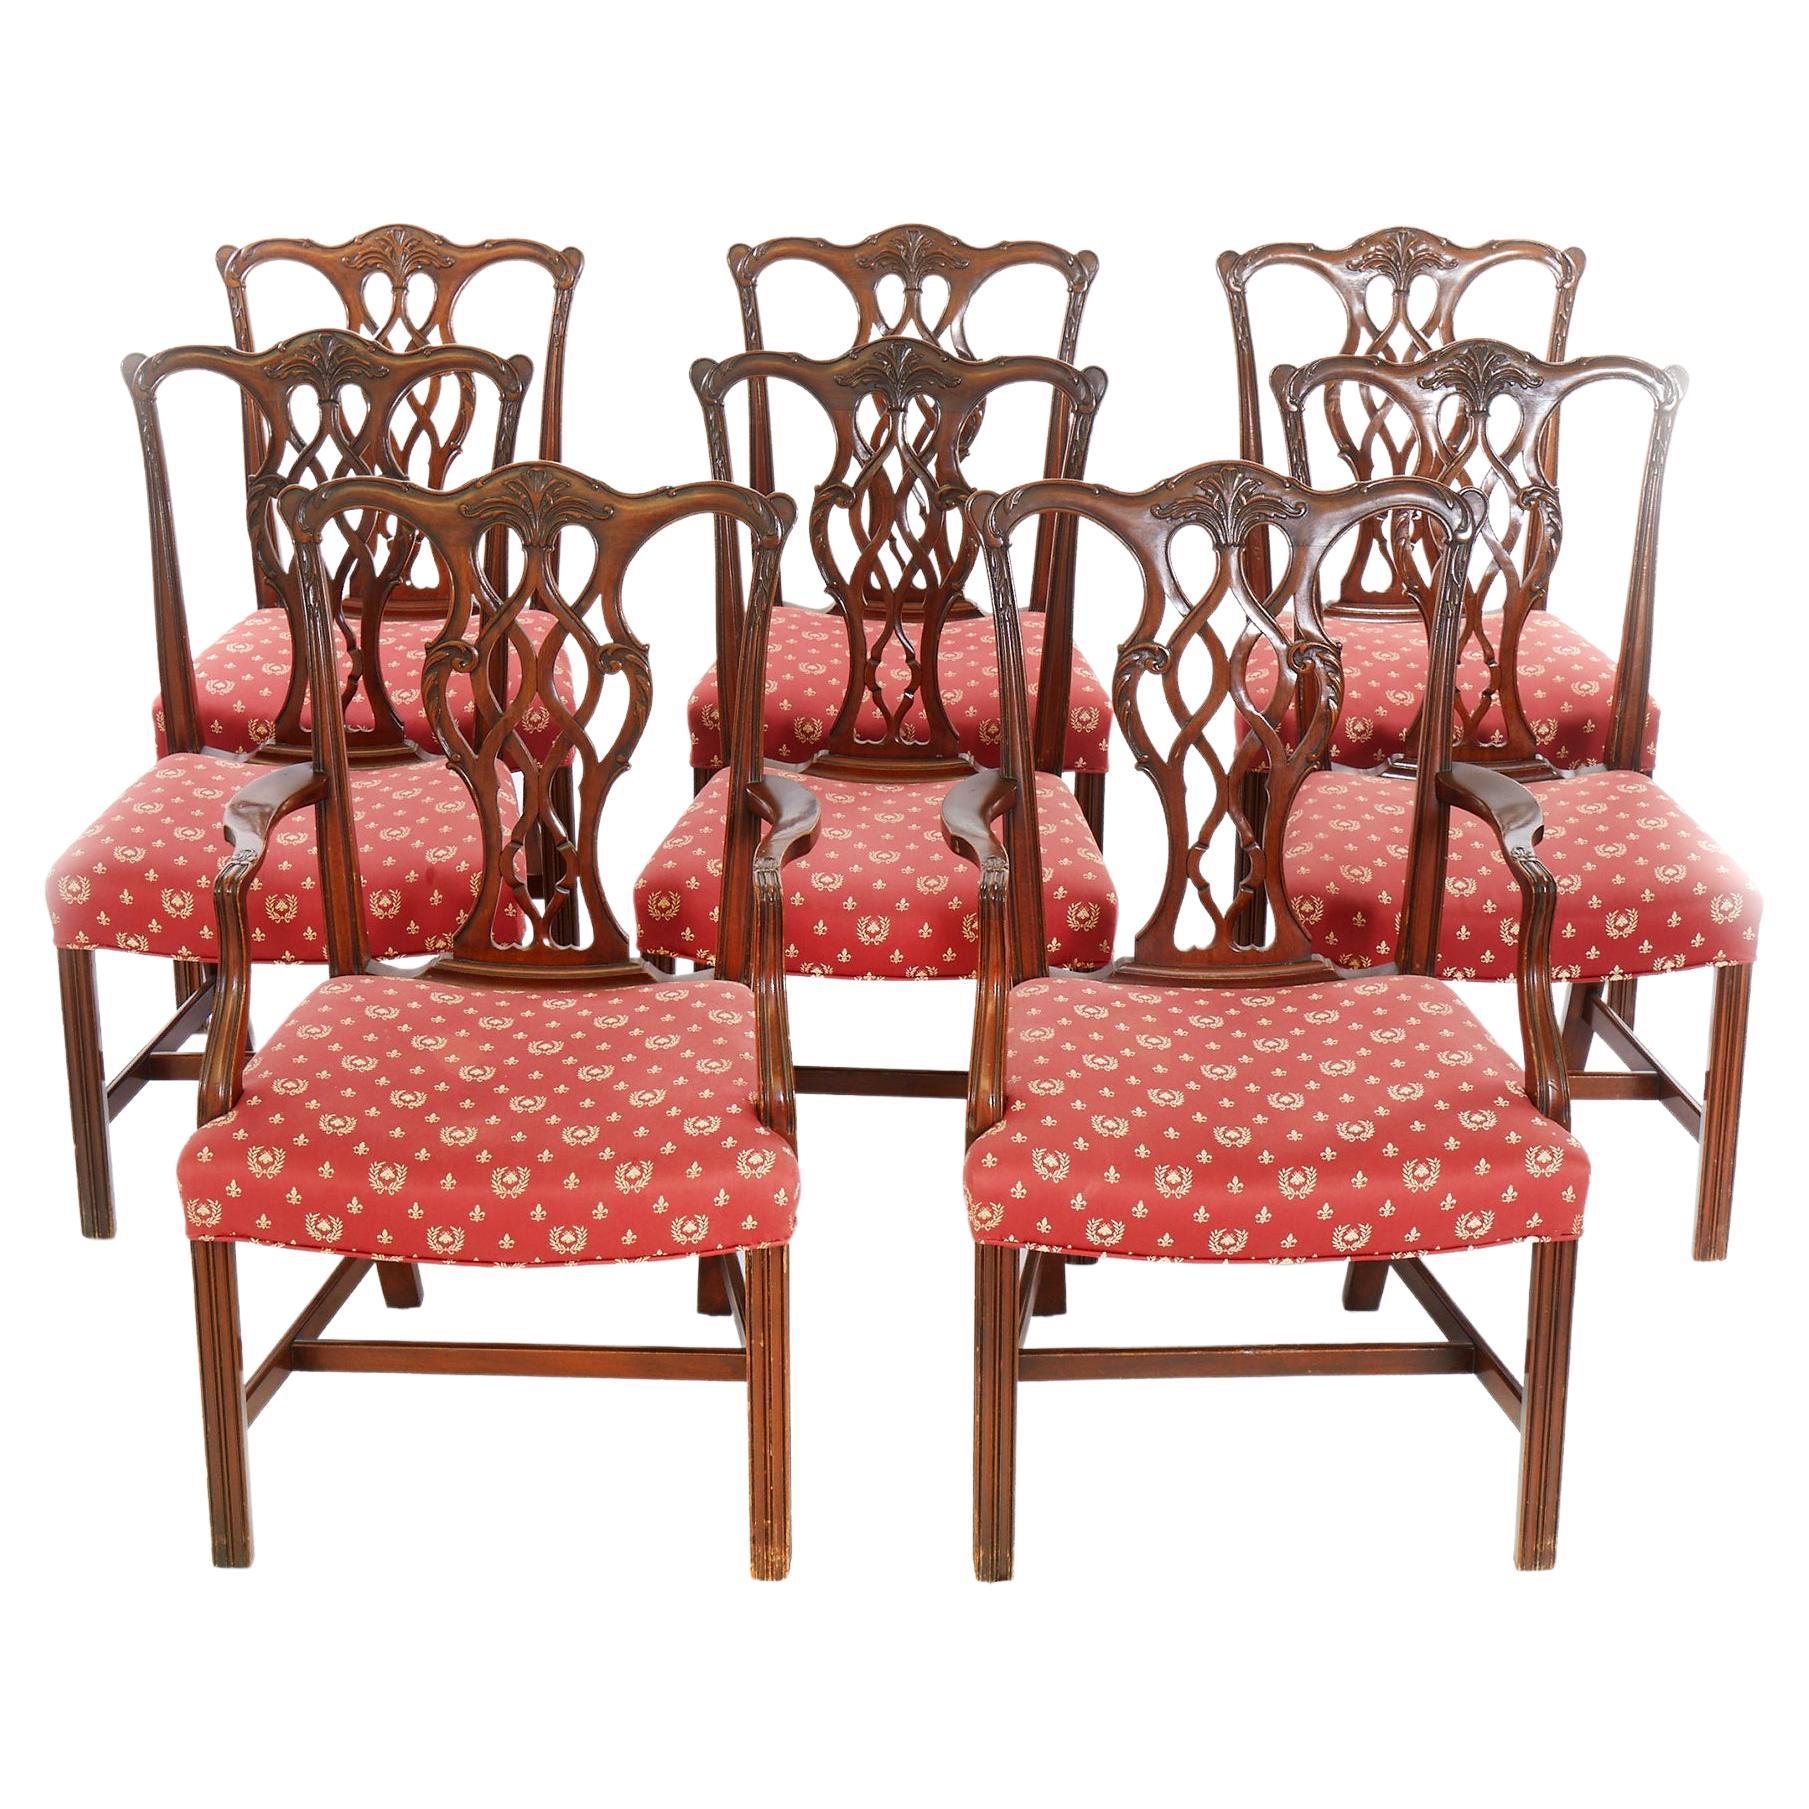 Eight Hand Carved Mahogany Dining Chair Set